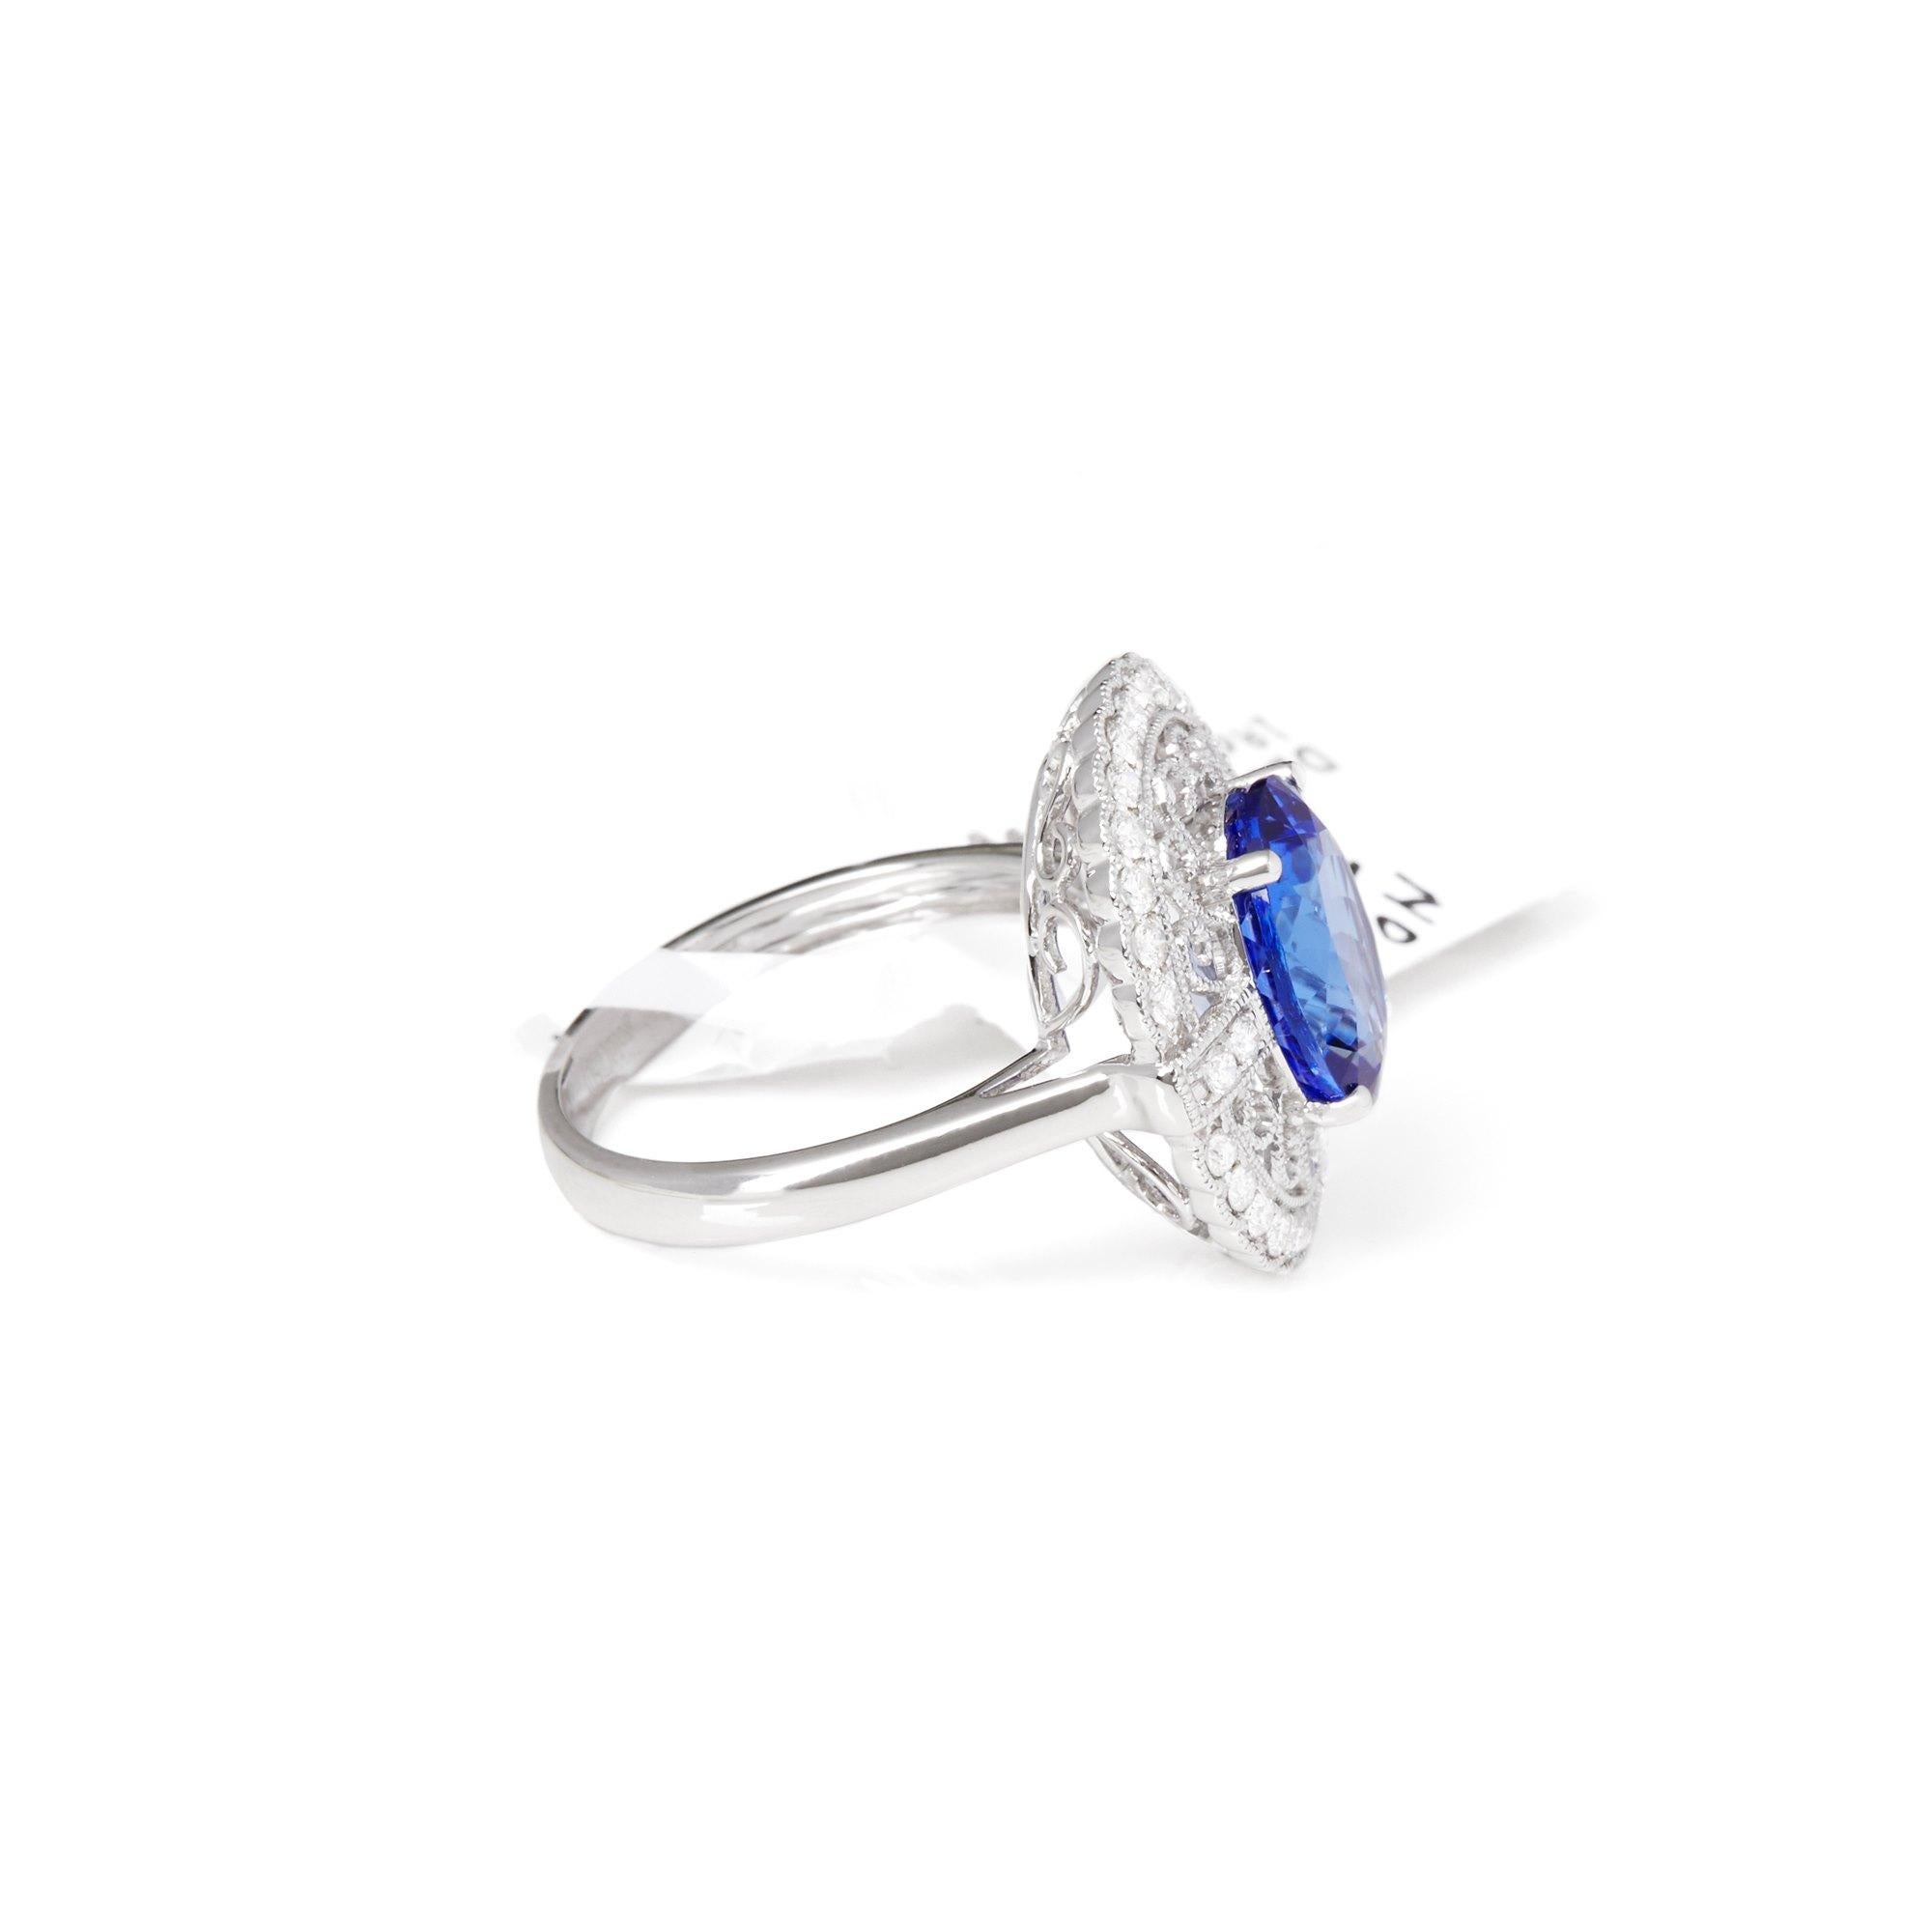 This ring designed by David Jerome is from his private collection and features one oval cut Tanzanite totalling 3.96cts sourced from the D block Mine in Tanzania. Set with round brilliant cut Diamonds totalling 0.45cts mounted in an 18k white gold